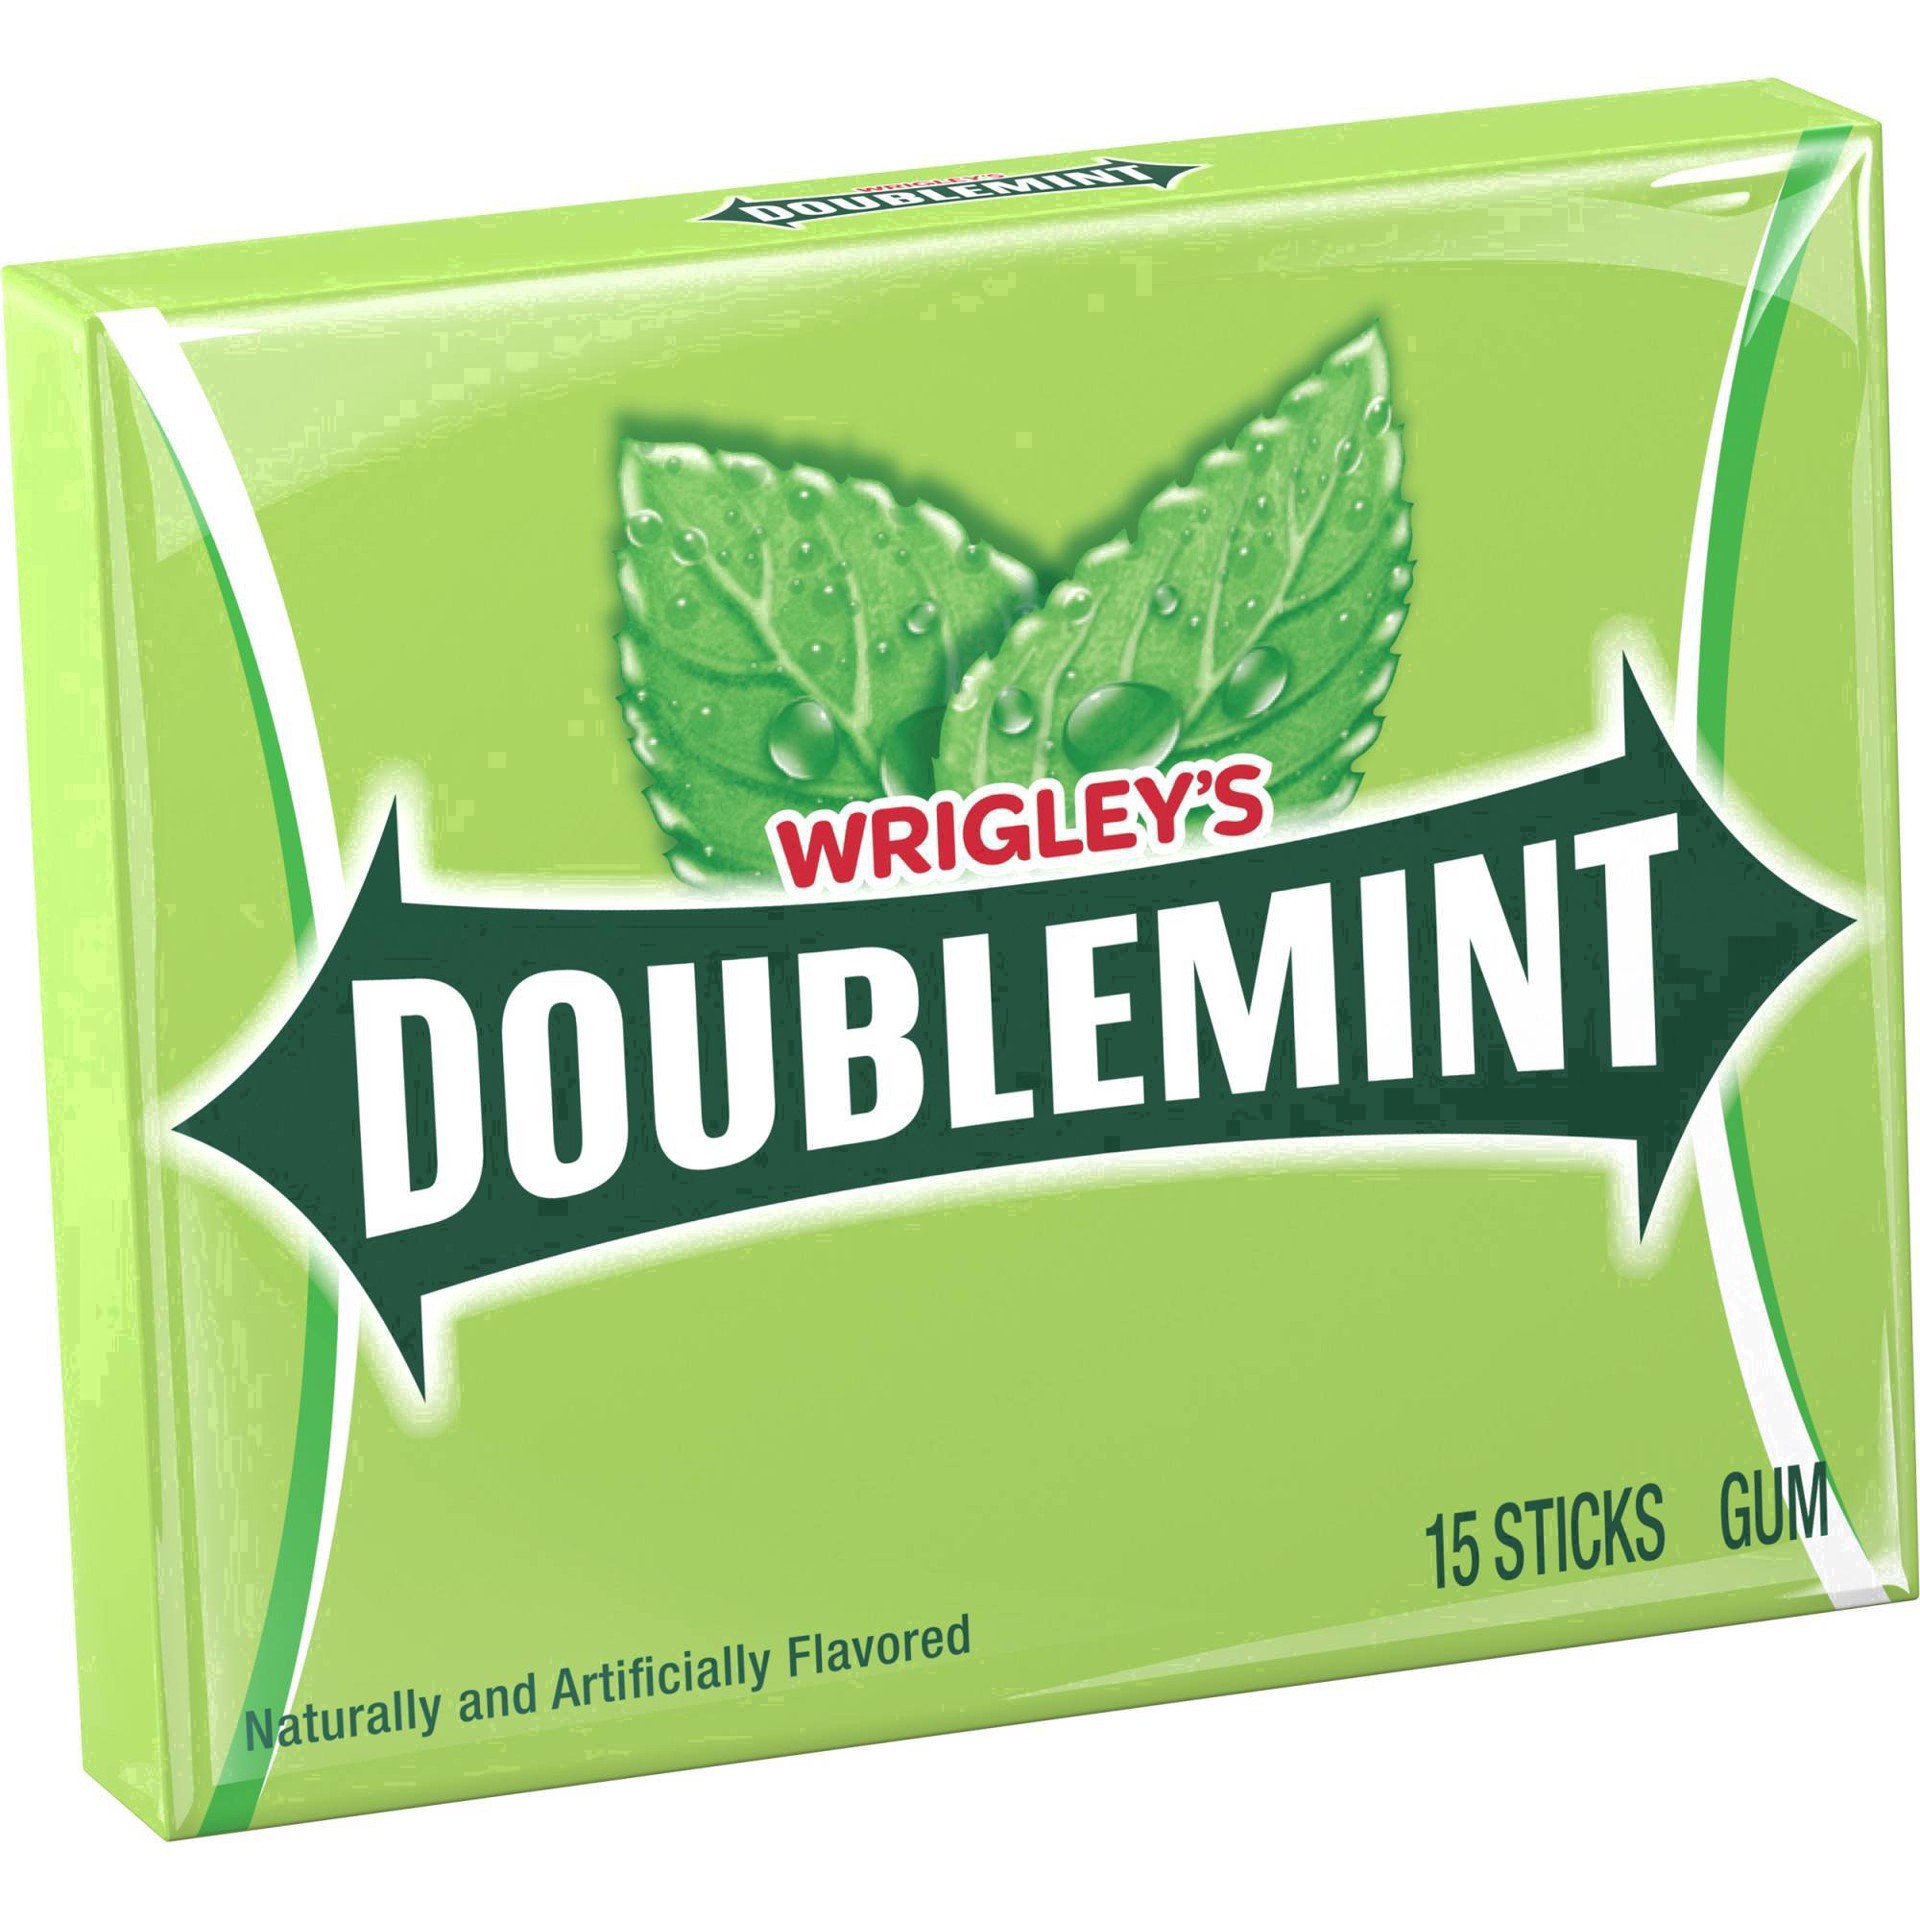 slide 130 of 134, Doublemint WRIGLEY'S DOUBLEMINT Bulk Chewing Gum, Value Pack, 15 ct (3 Pack), 45 ct